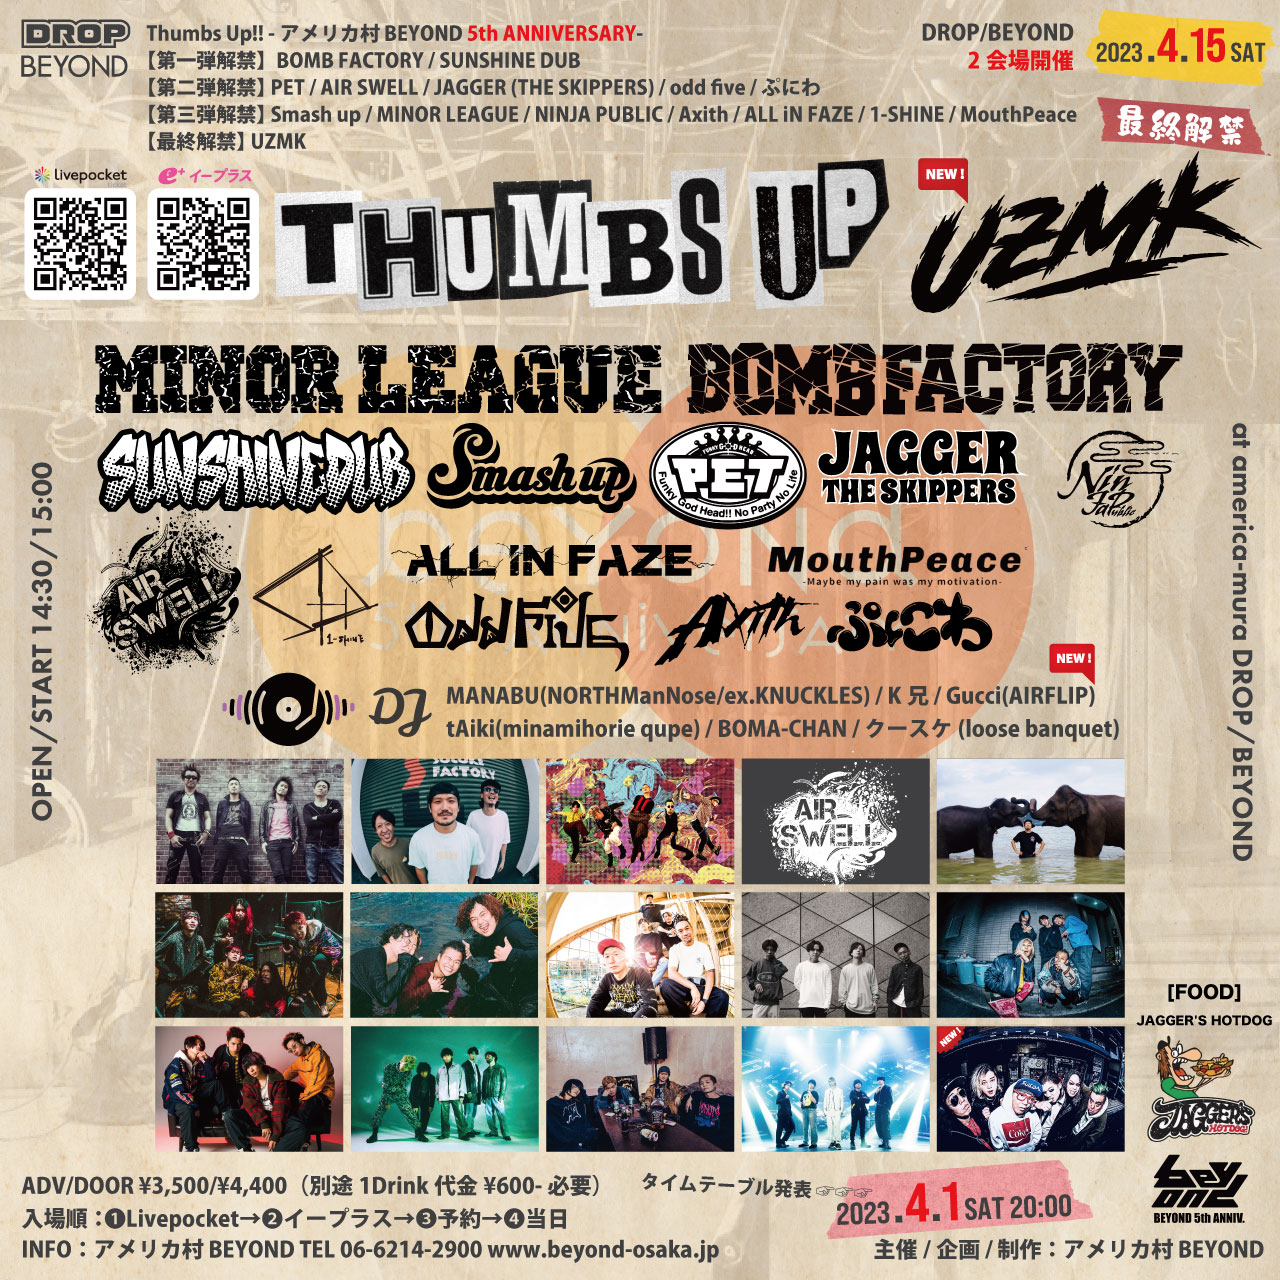 Thumbs Up!! -アメリカ村 BEYOND 5th ANNIVERSARY-